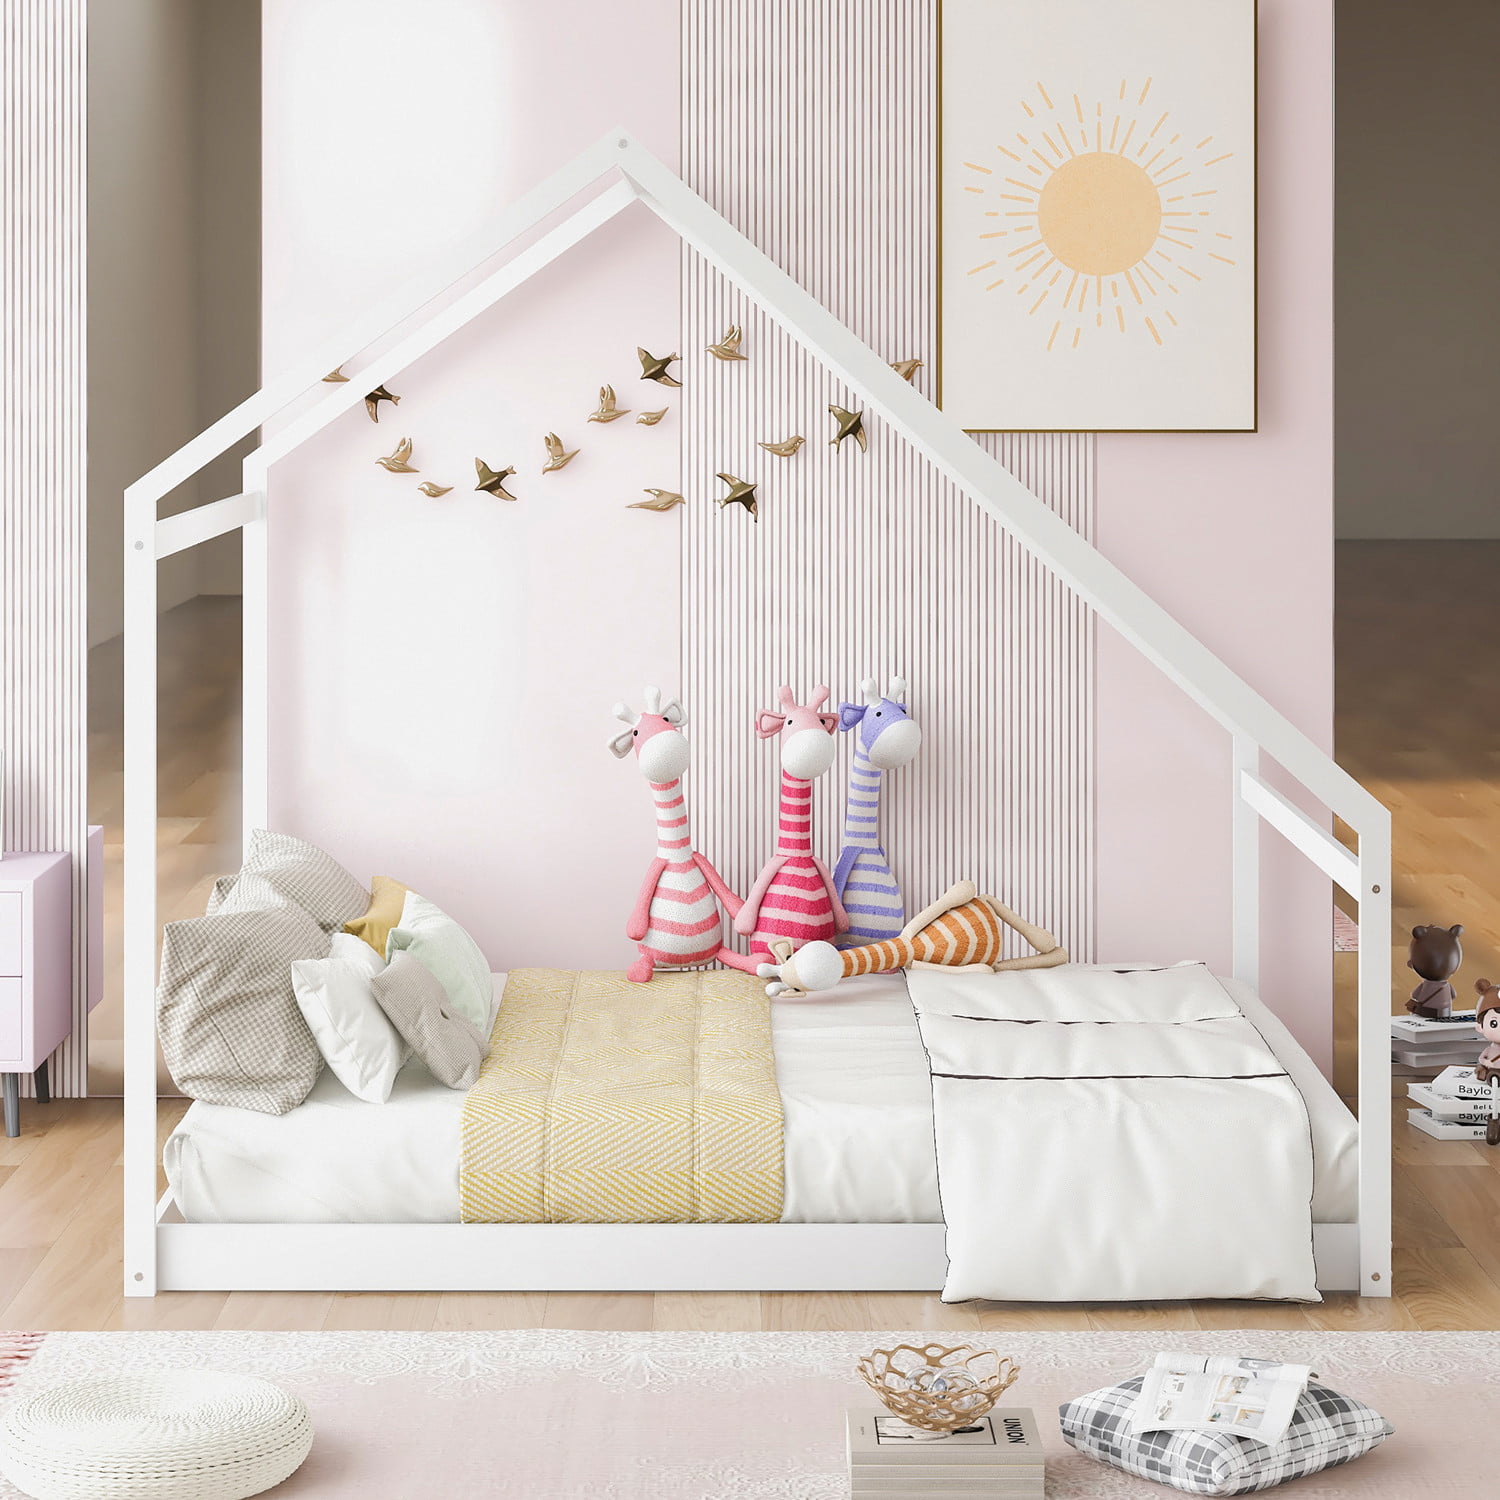 3D Model – Kids House Bed Frame by Coco